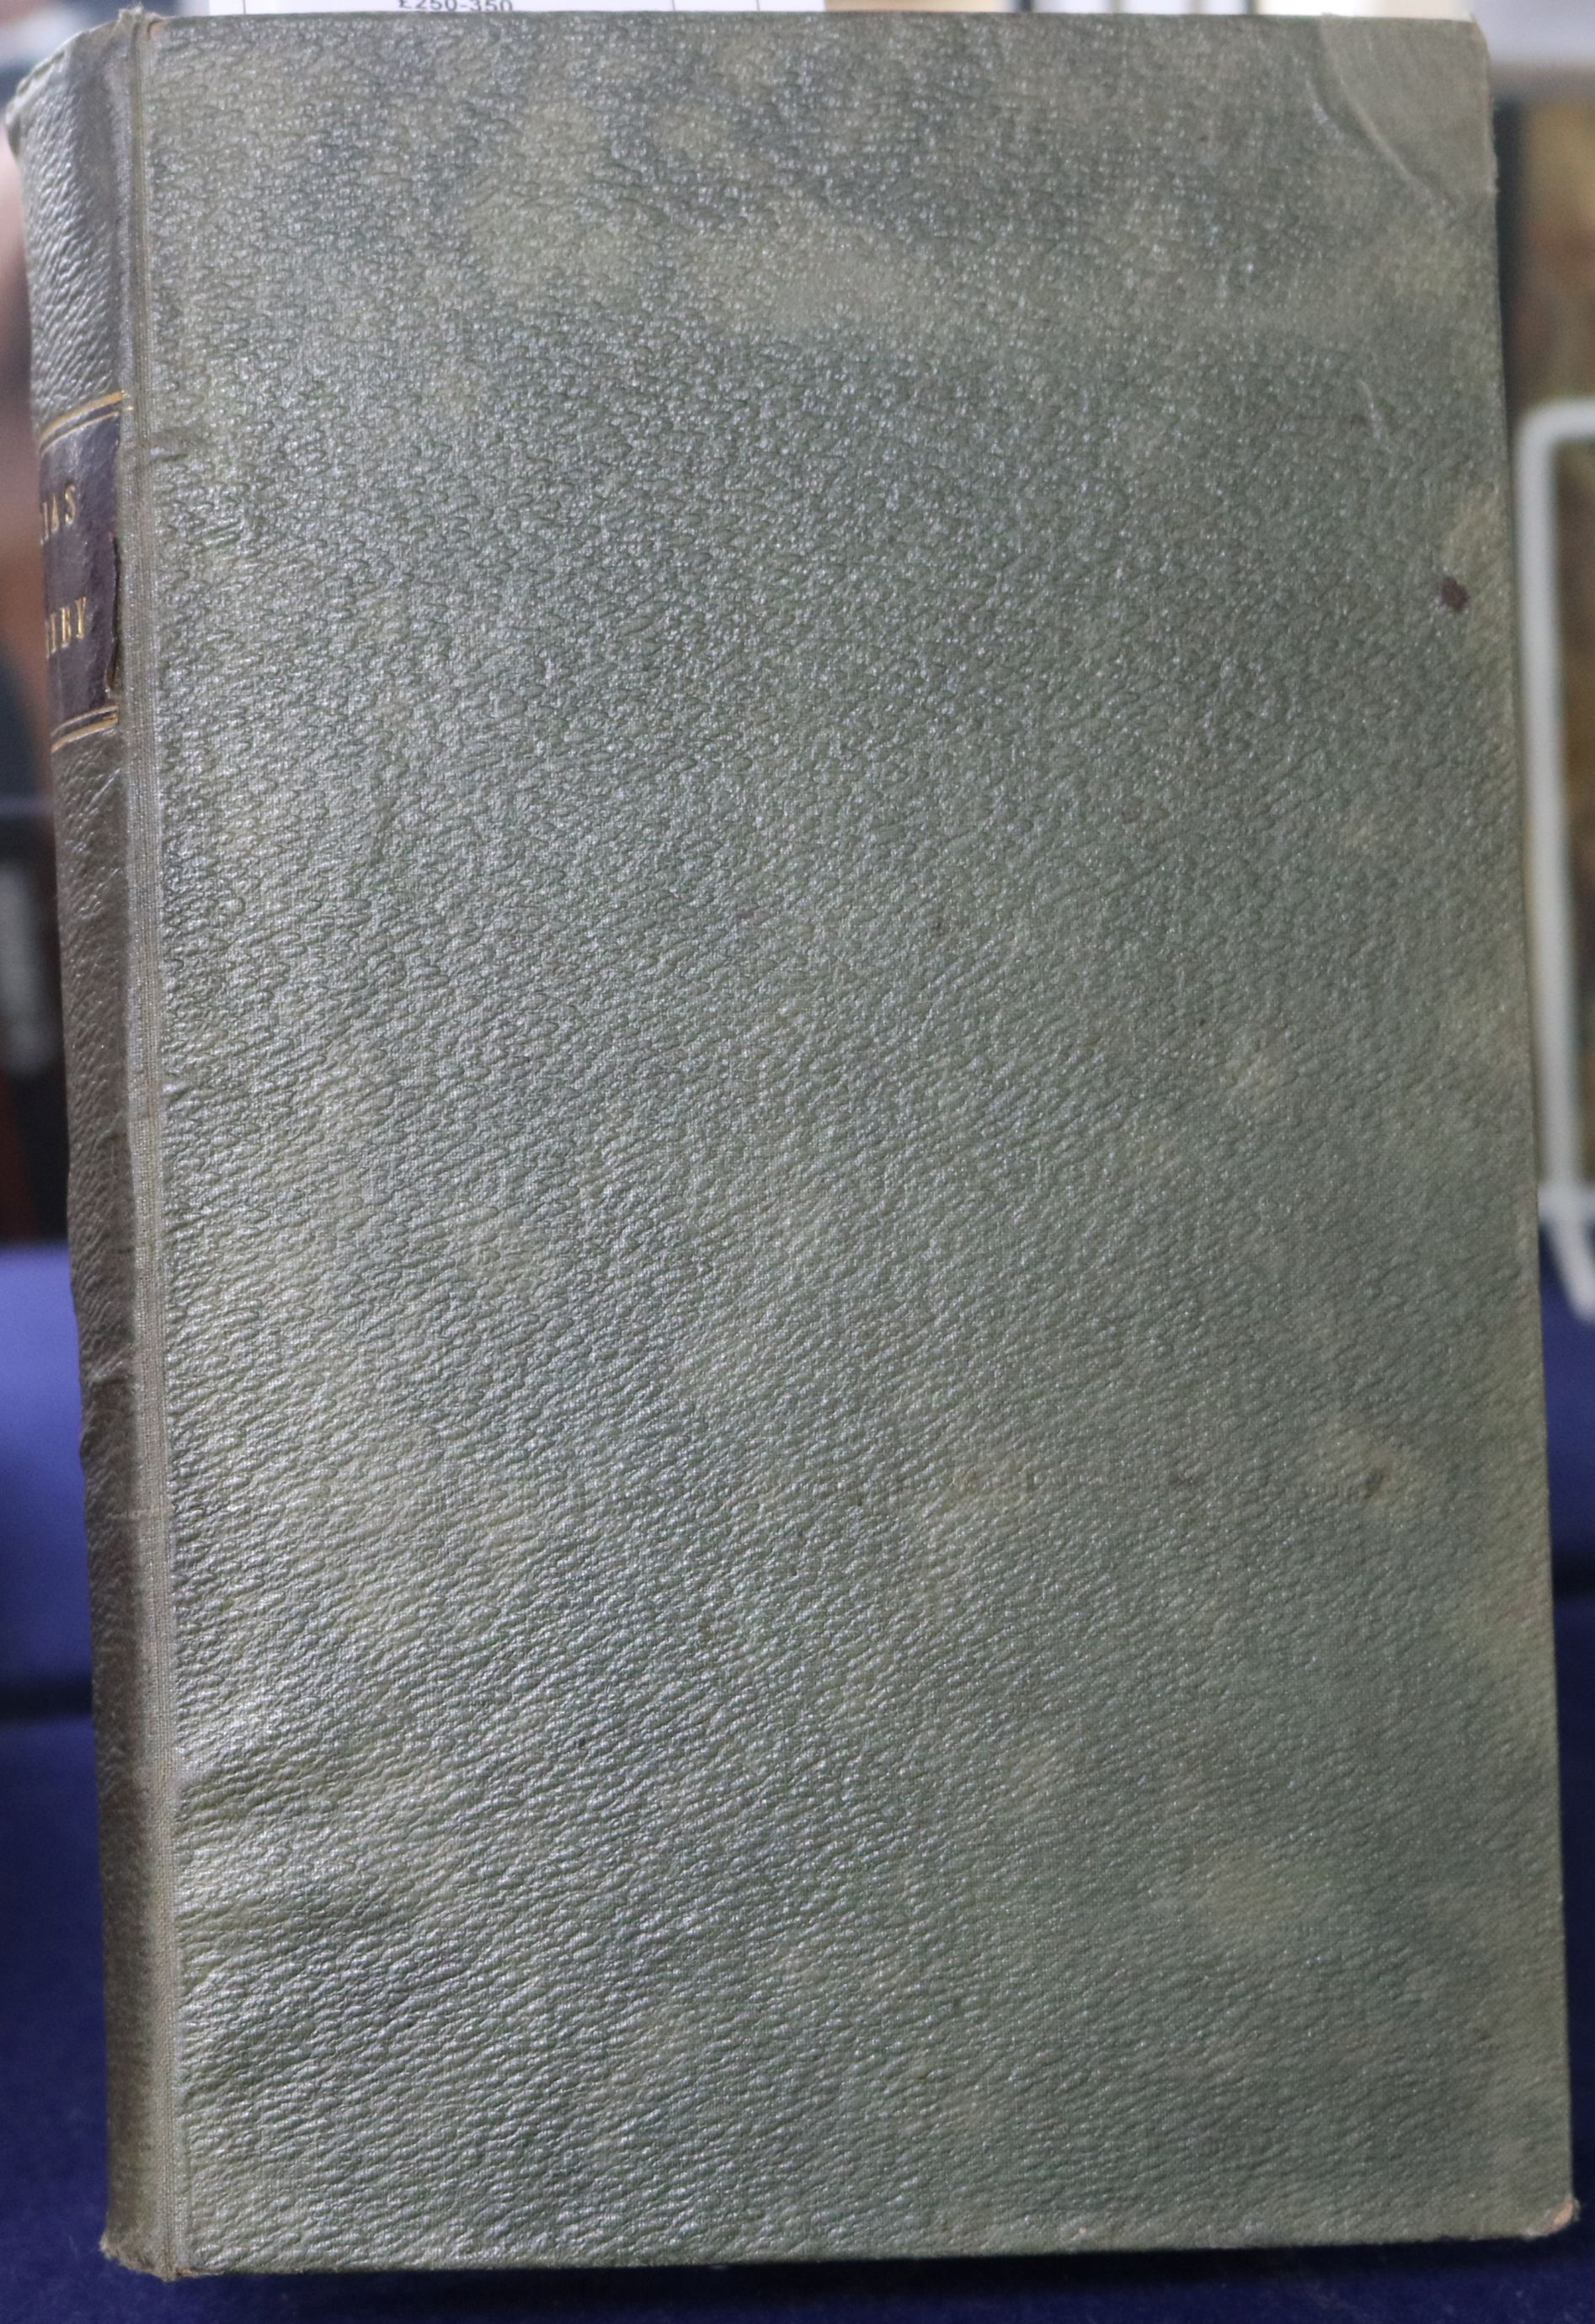 Dickens, Charles - Nicholas Nickelby, 1st edition, in book form, 8vo, olive green cloth, illustrated - Image 2 of 3